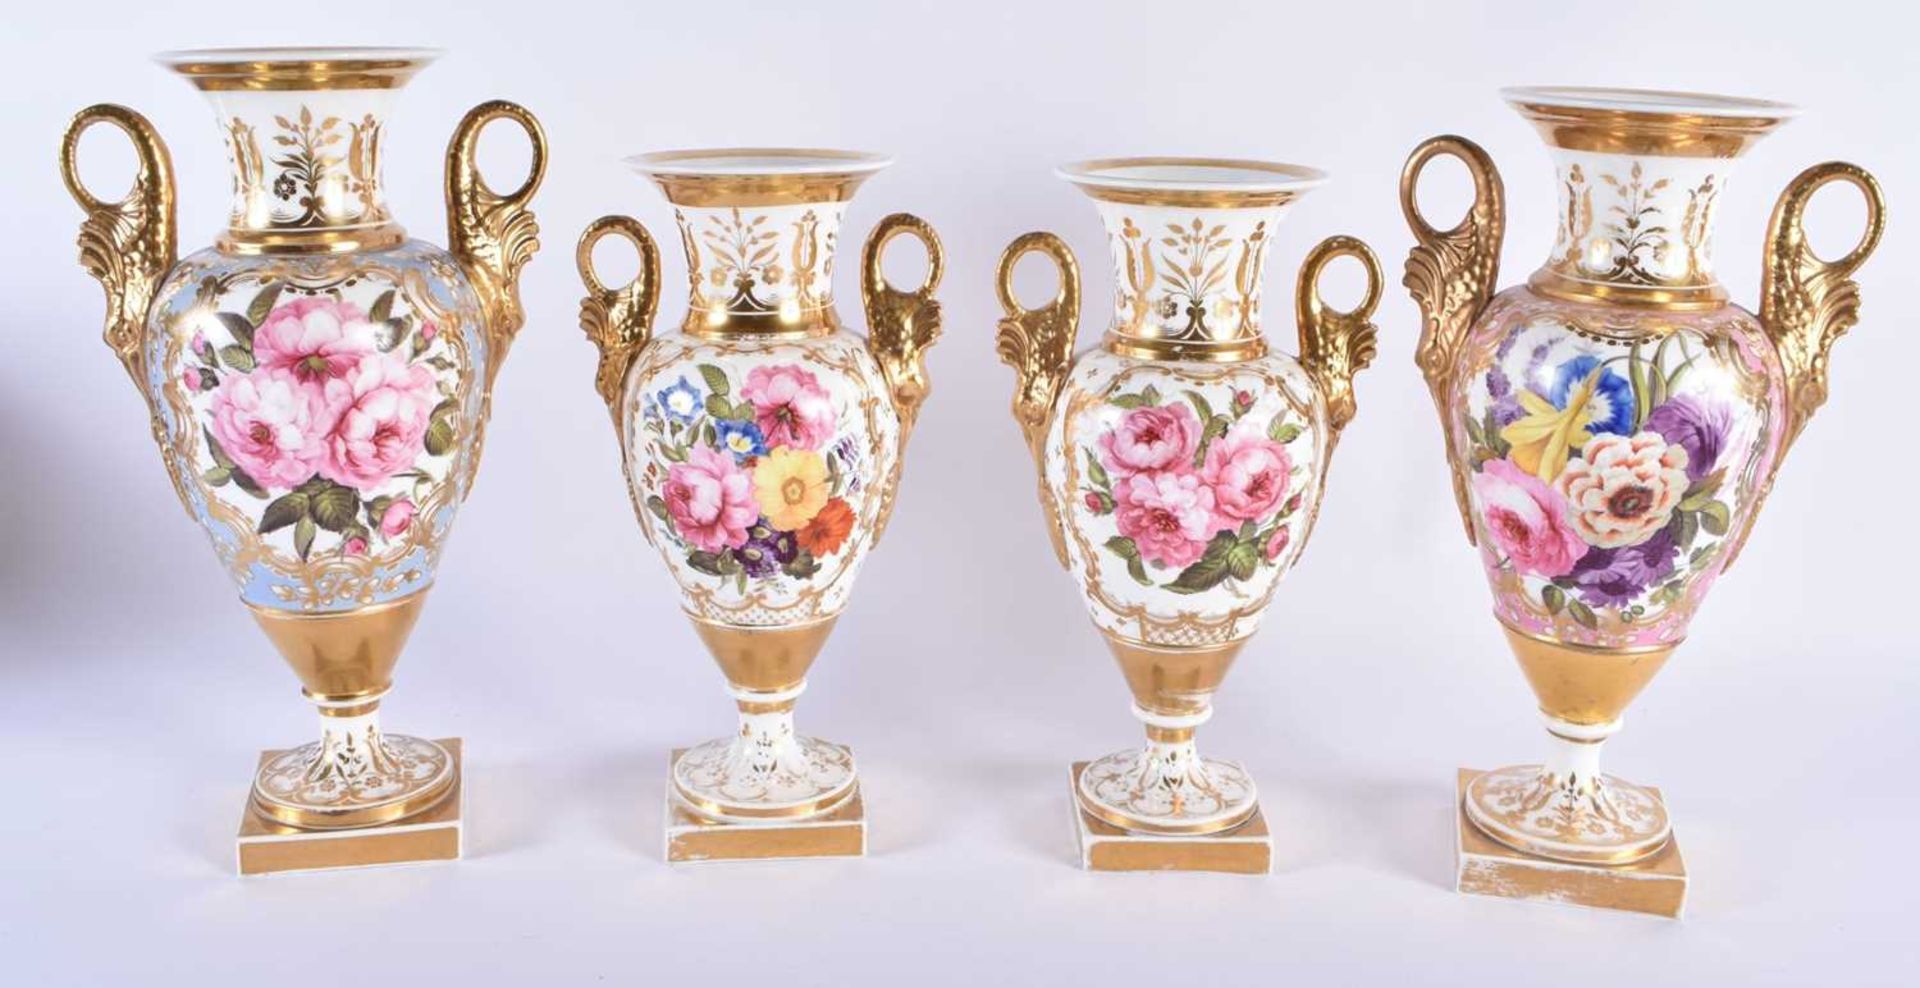 A FINE SET OF FOUR LATE 18TH/19TH CENTURY CHAMBERLAINS WORCESTER VASES beautifully painted with - Image 3 of 27